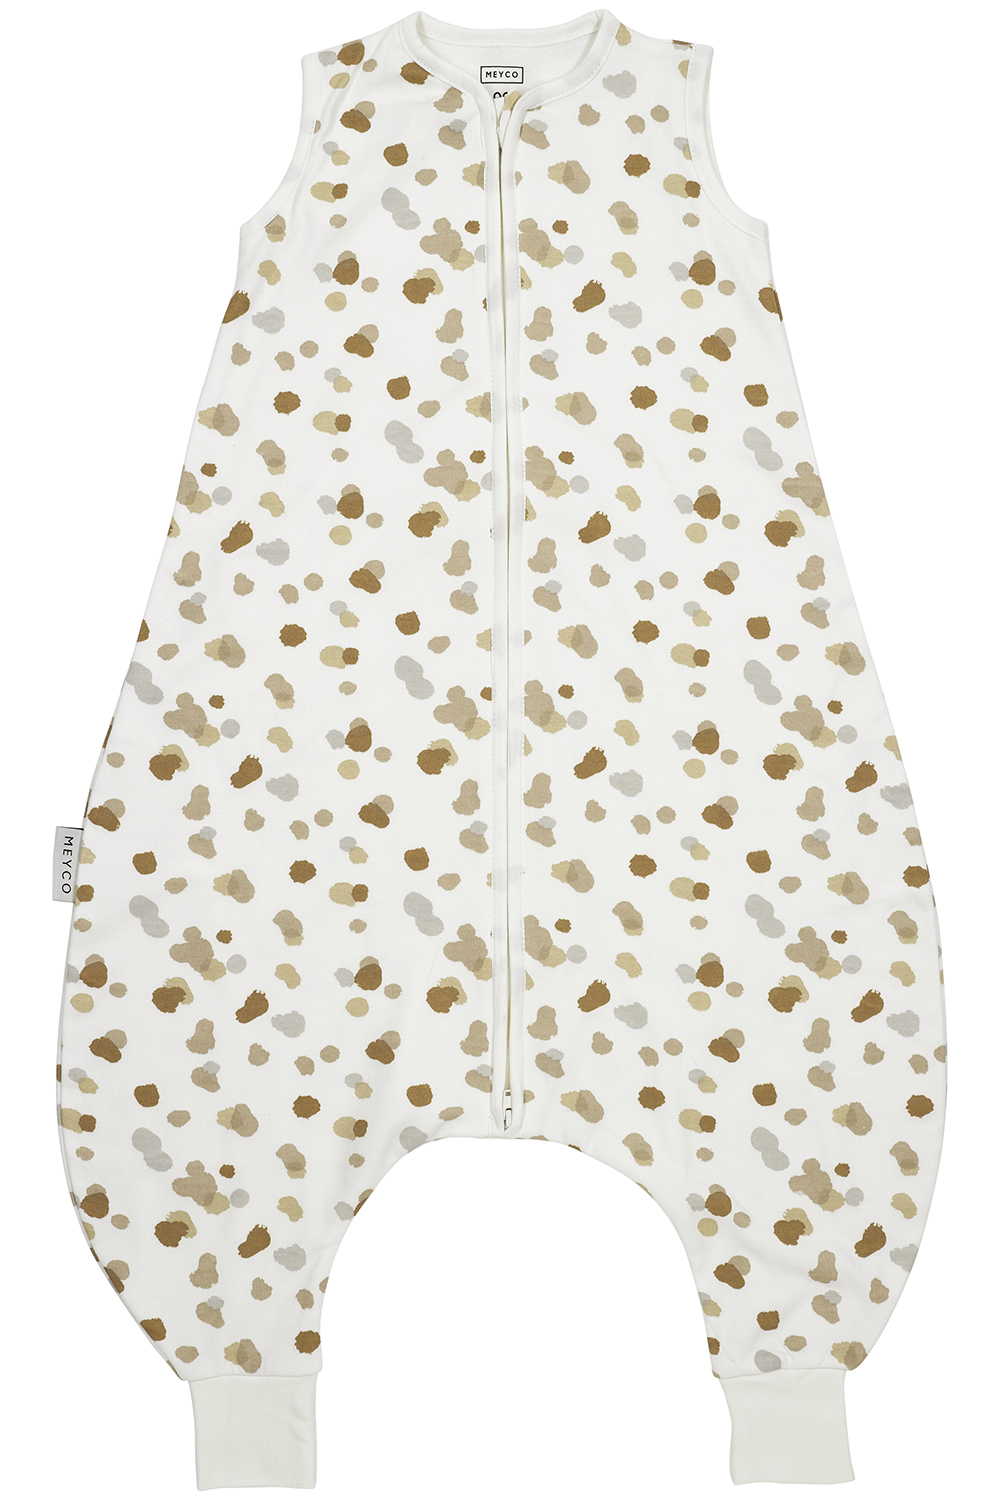 Baby sommer Schlafoverall Jumper Stains - sand - 104cm